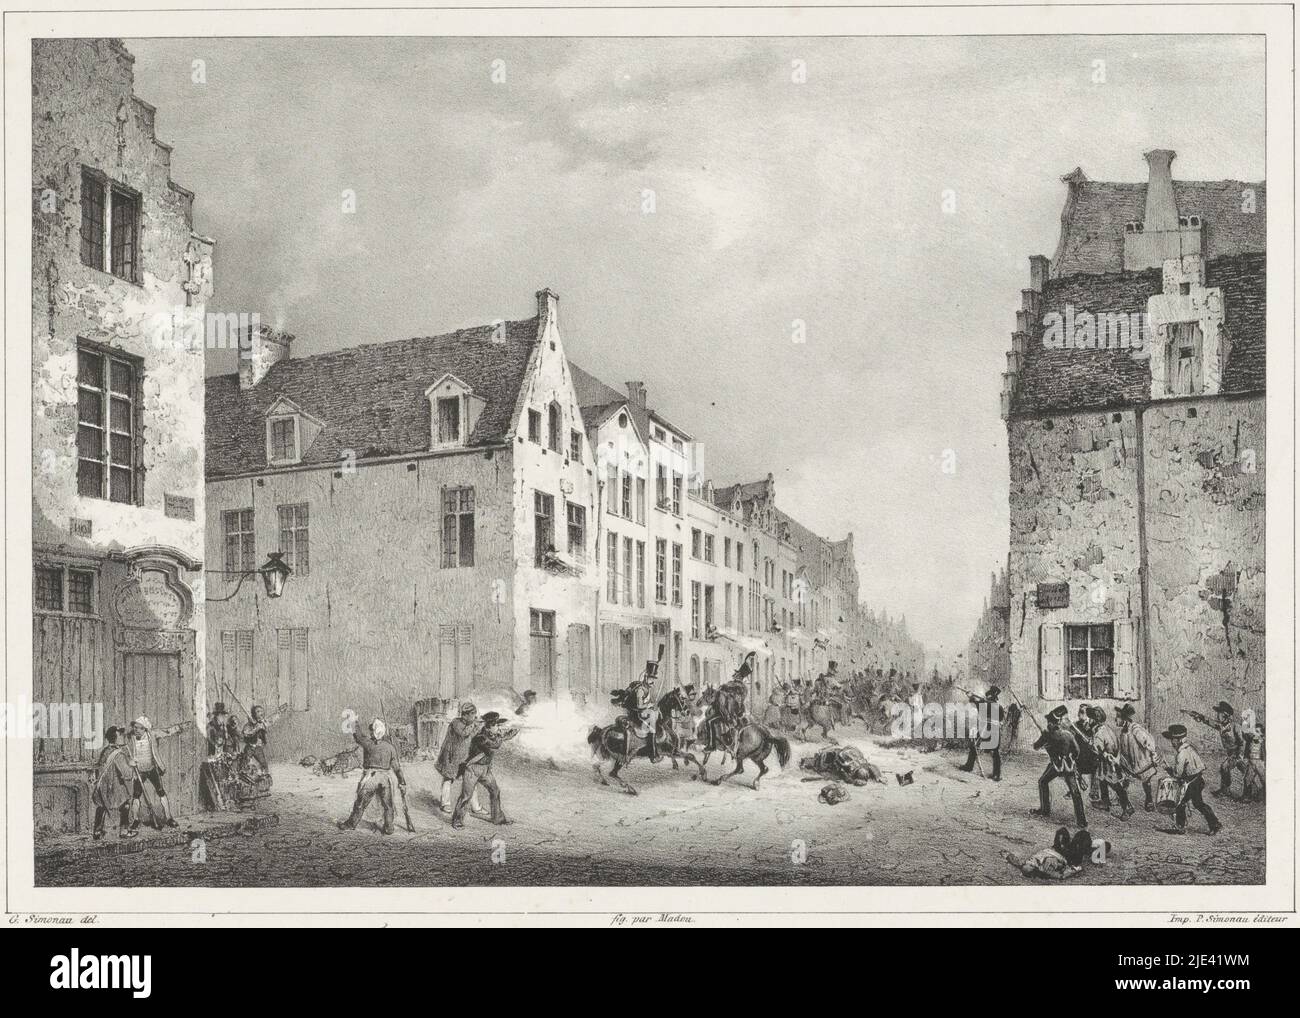 Fighting at the Flemish Gate, 1830, Gustave Adolphe Simonau, after Jean Baptiste Madou, 1830 - 1831, Belgian insurgents chase a Dutch division to flight at Porte de Flandre (Flemish Gate), Brussels, September 23, 1830. Part of a series of six plates of the fighting in Brussels in September., print maker: Gustave Adolphe Simonau, (mentioned on object), intermediary draughtsman: Jean Baptiste Madou, (mentioned on object), publisher: Pierre Simonau, (mentioned on object), Brussels, 1830 - 1831, paper, h 280 mm × w 384 mm Stock Photo